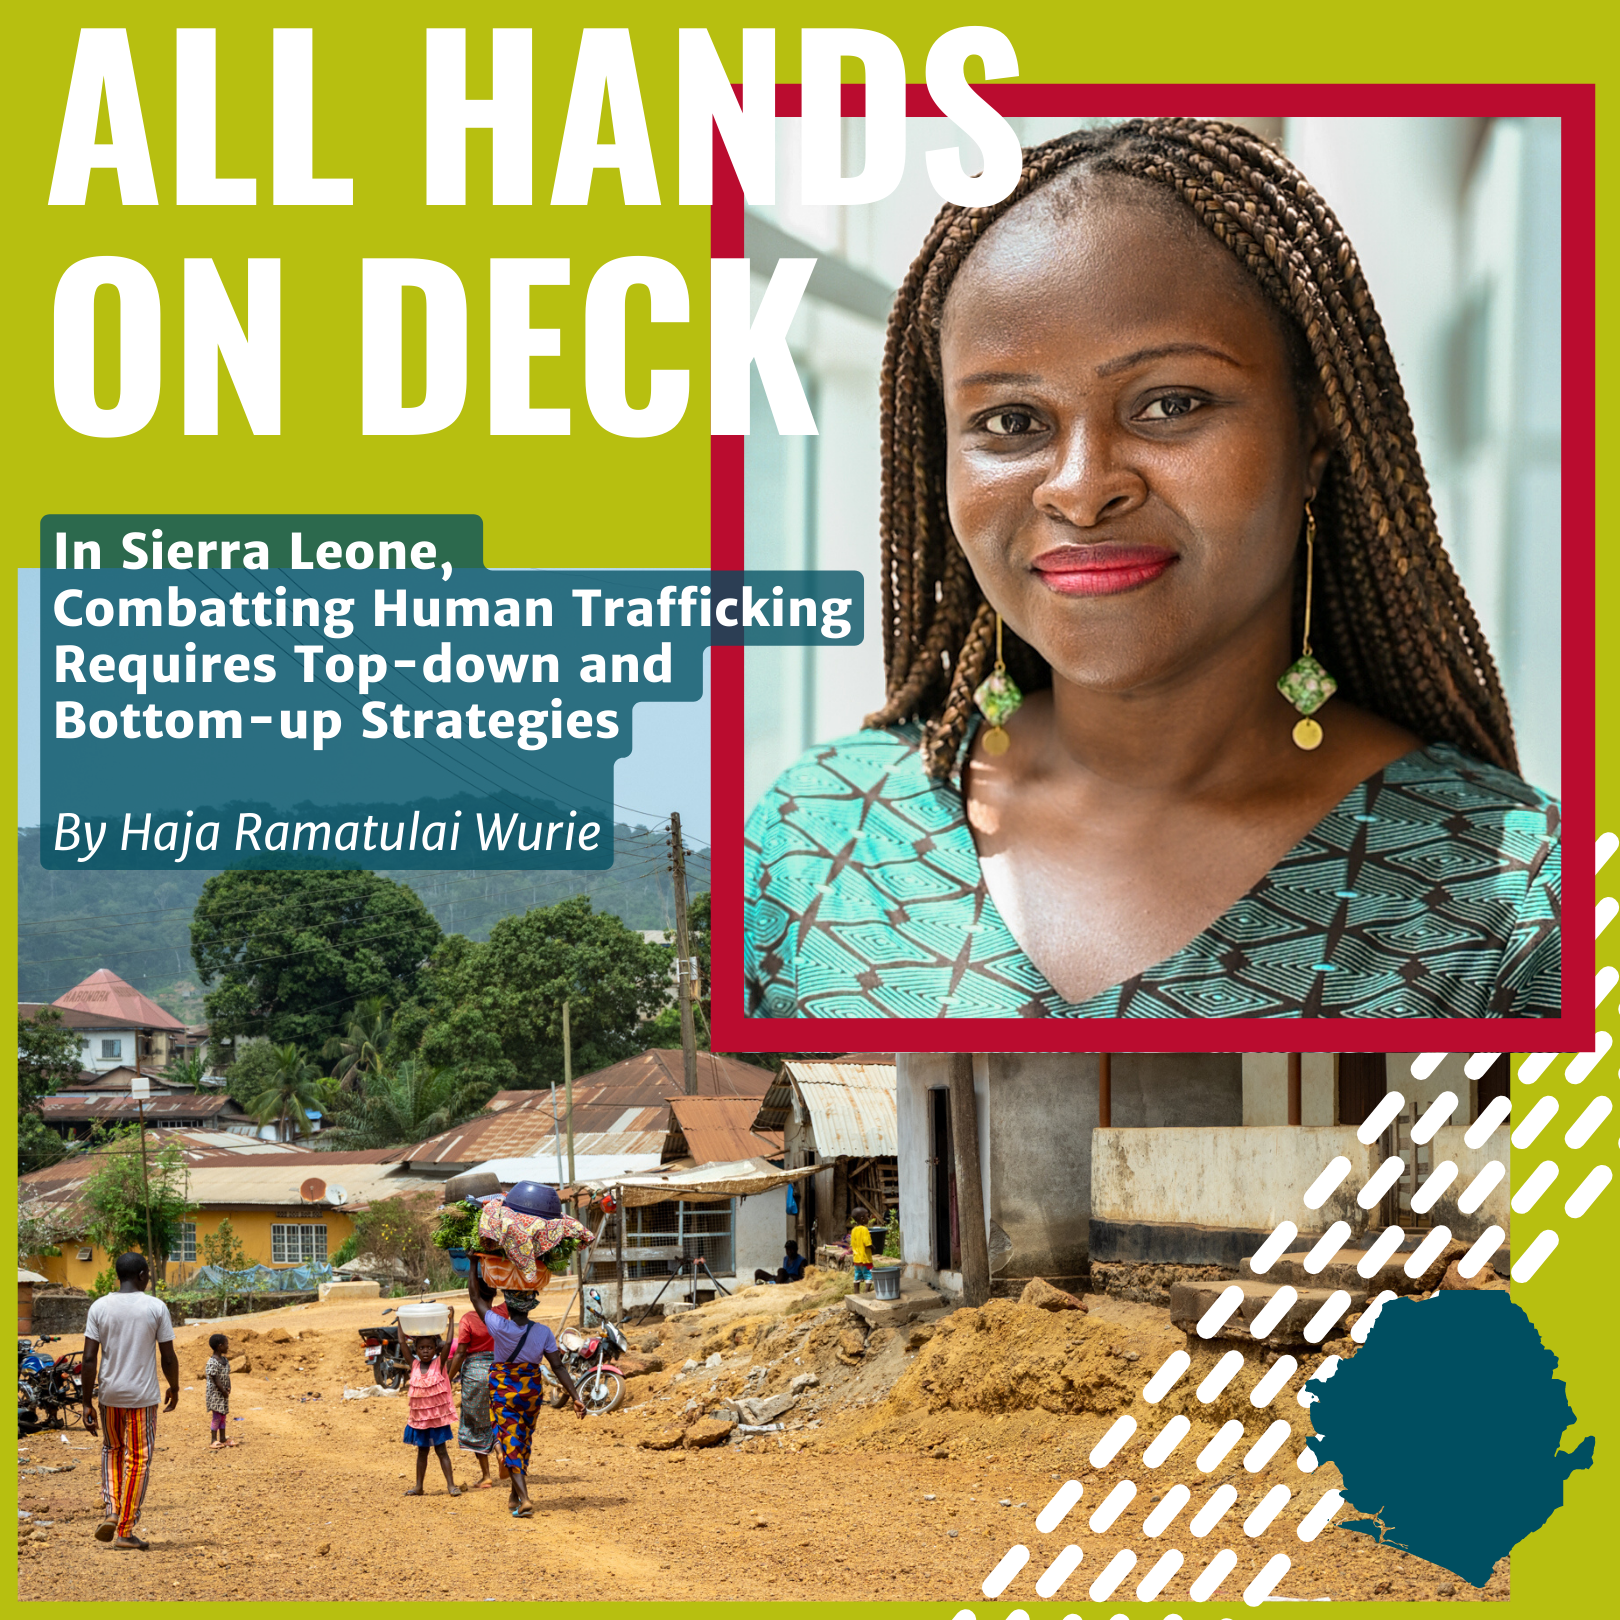 All Hands on Deck: Combatting Human Trafficking in Sierra Leone Requires Top-down and Bottom-up Strategies